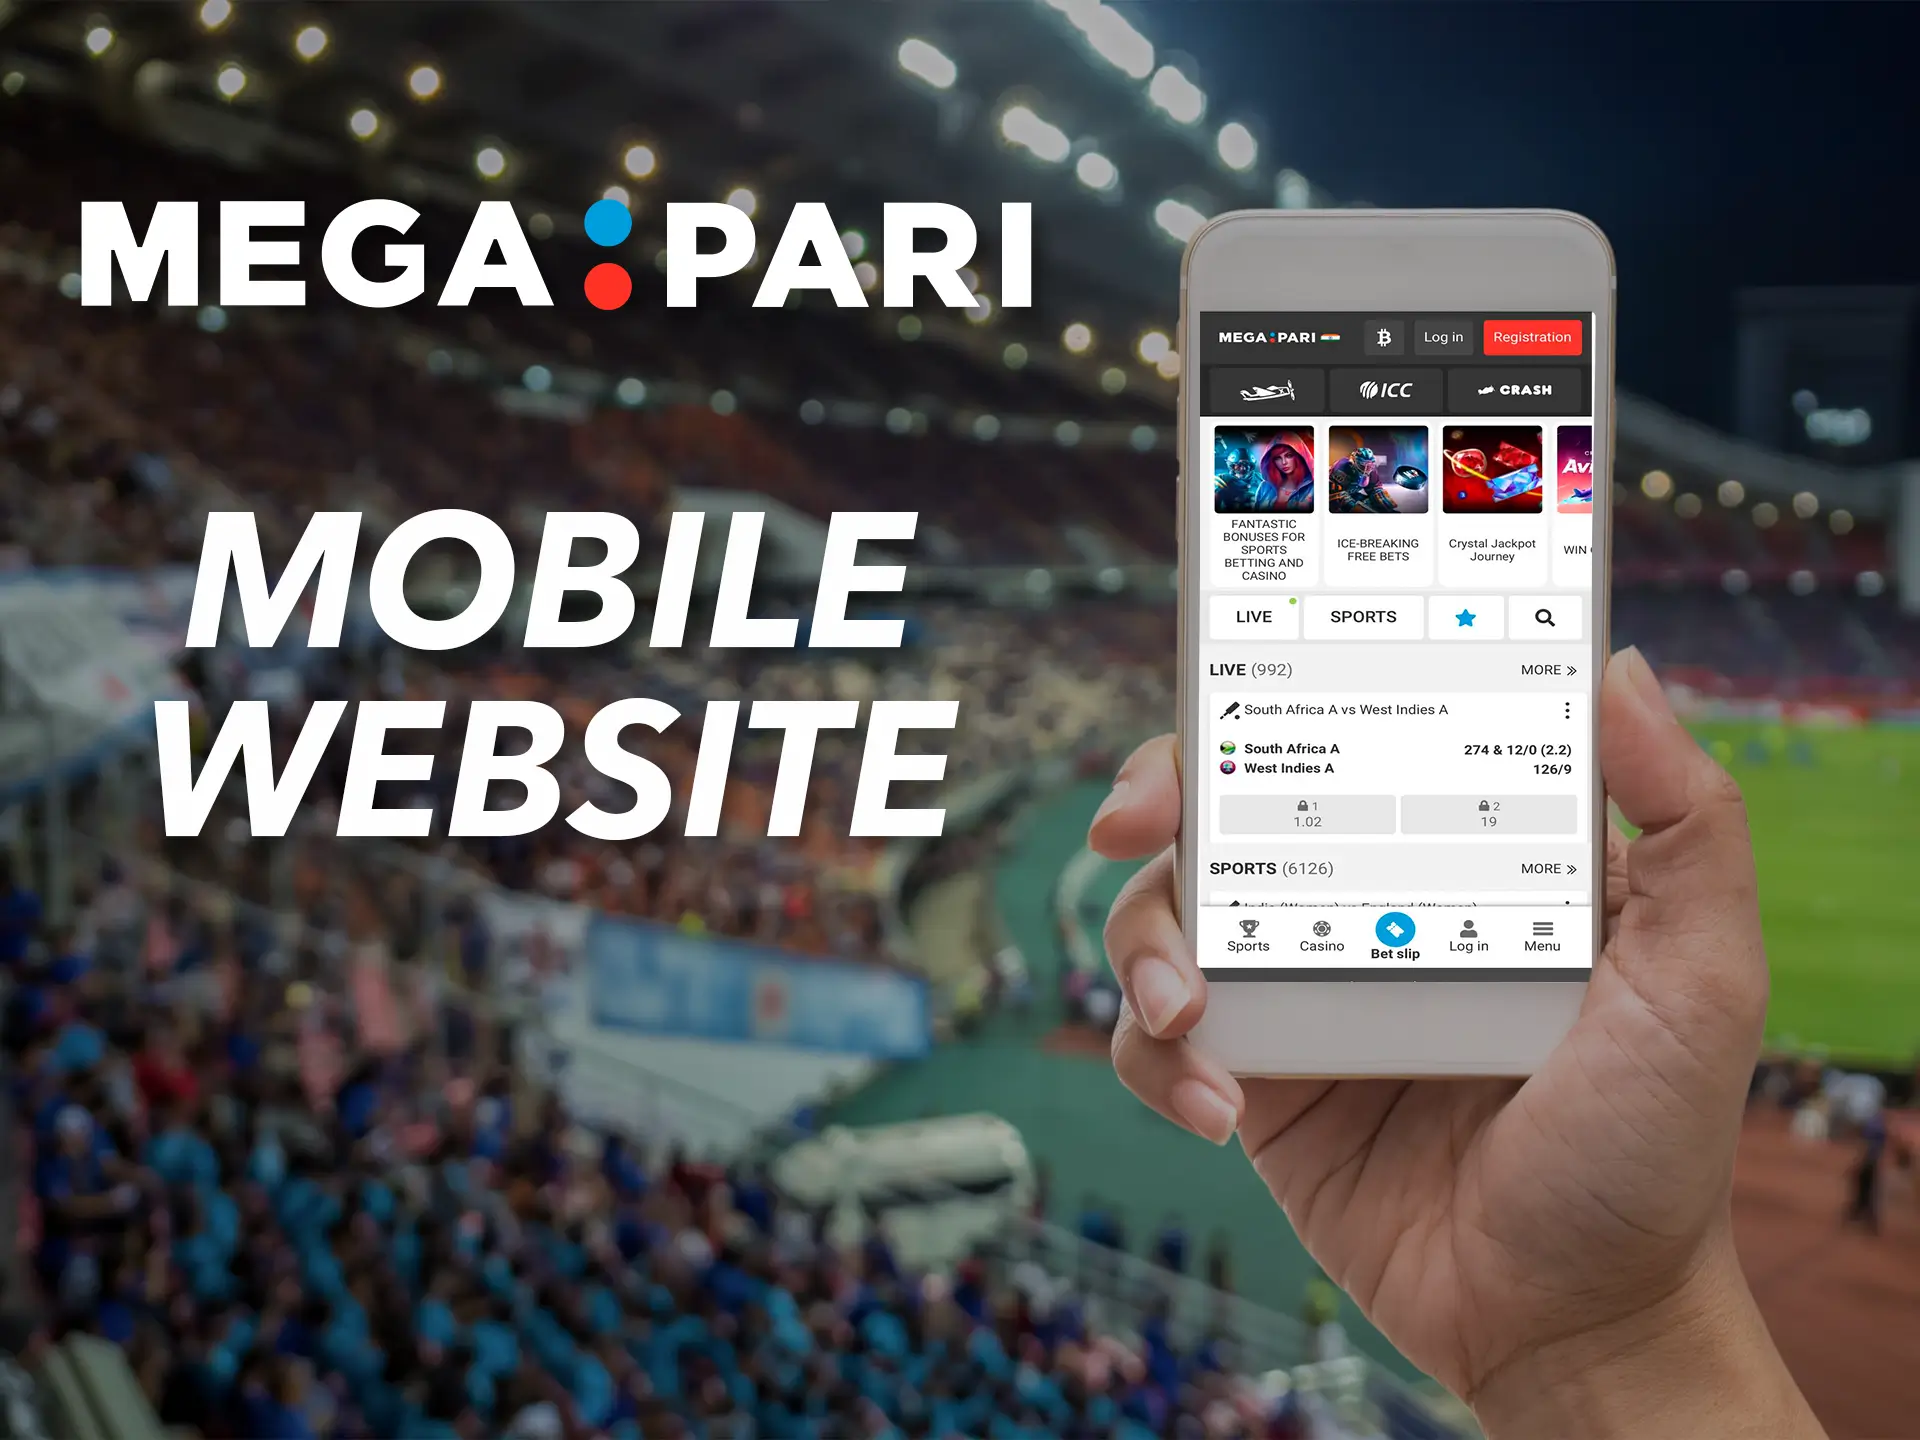 Wherever you are you can always place your bets through Megapari's mobile site.